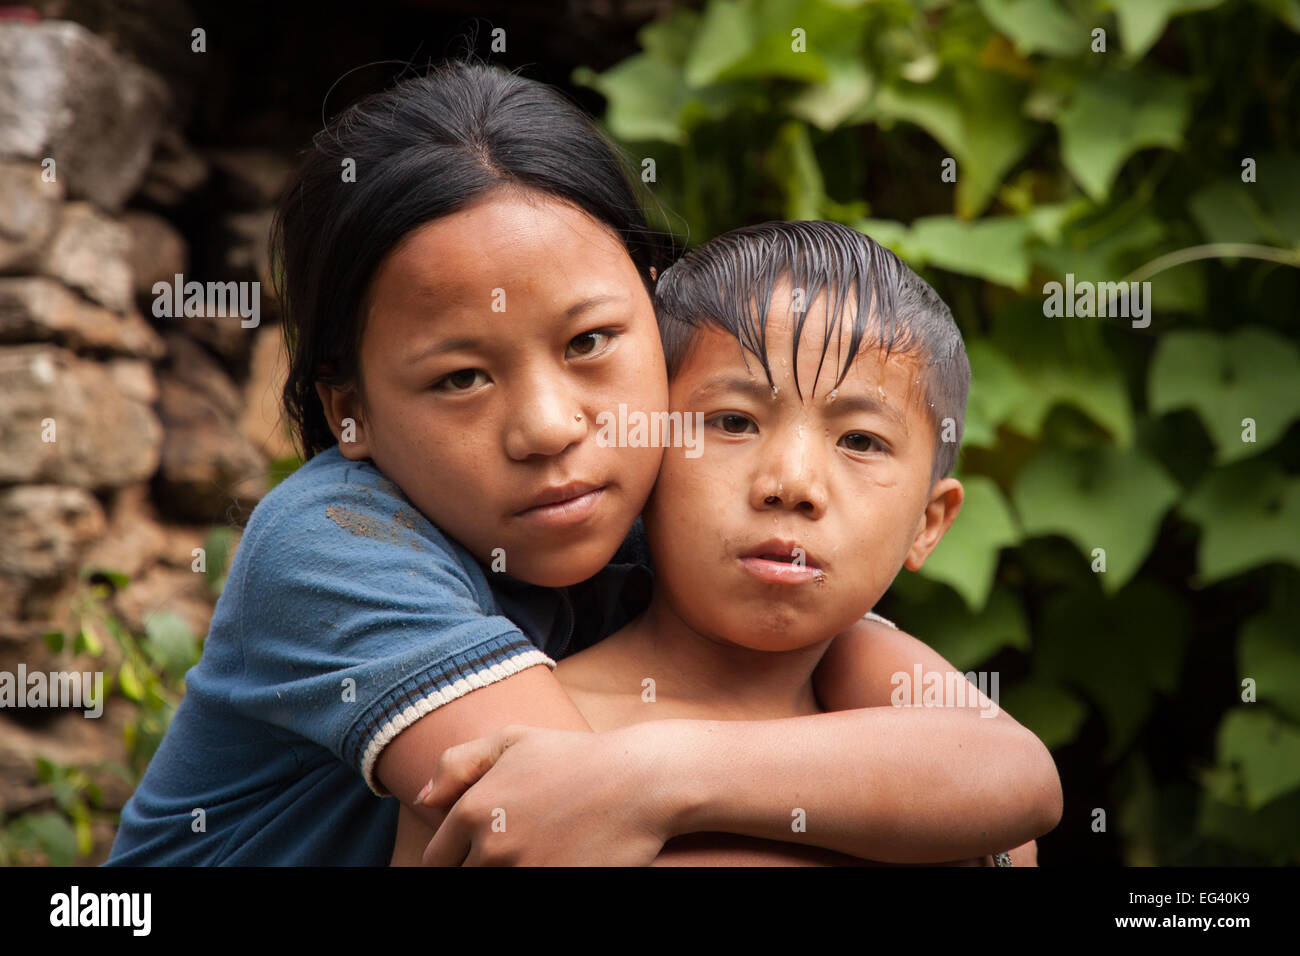 Nepalese brother and sister Stock Photo